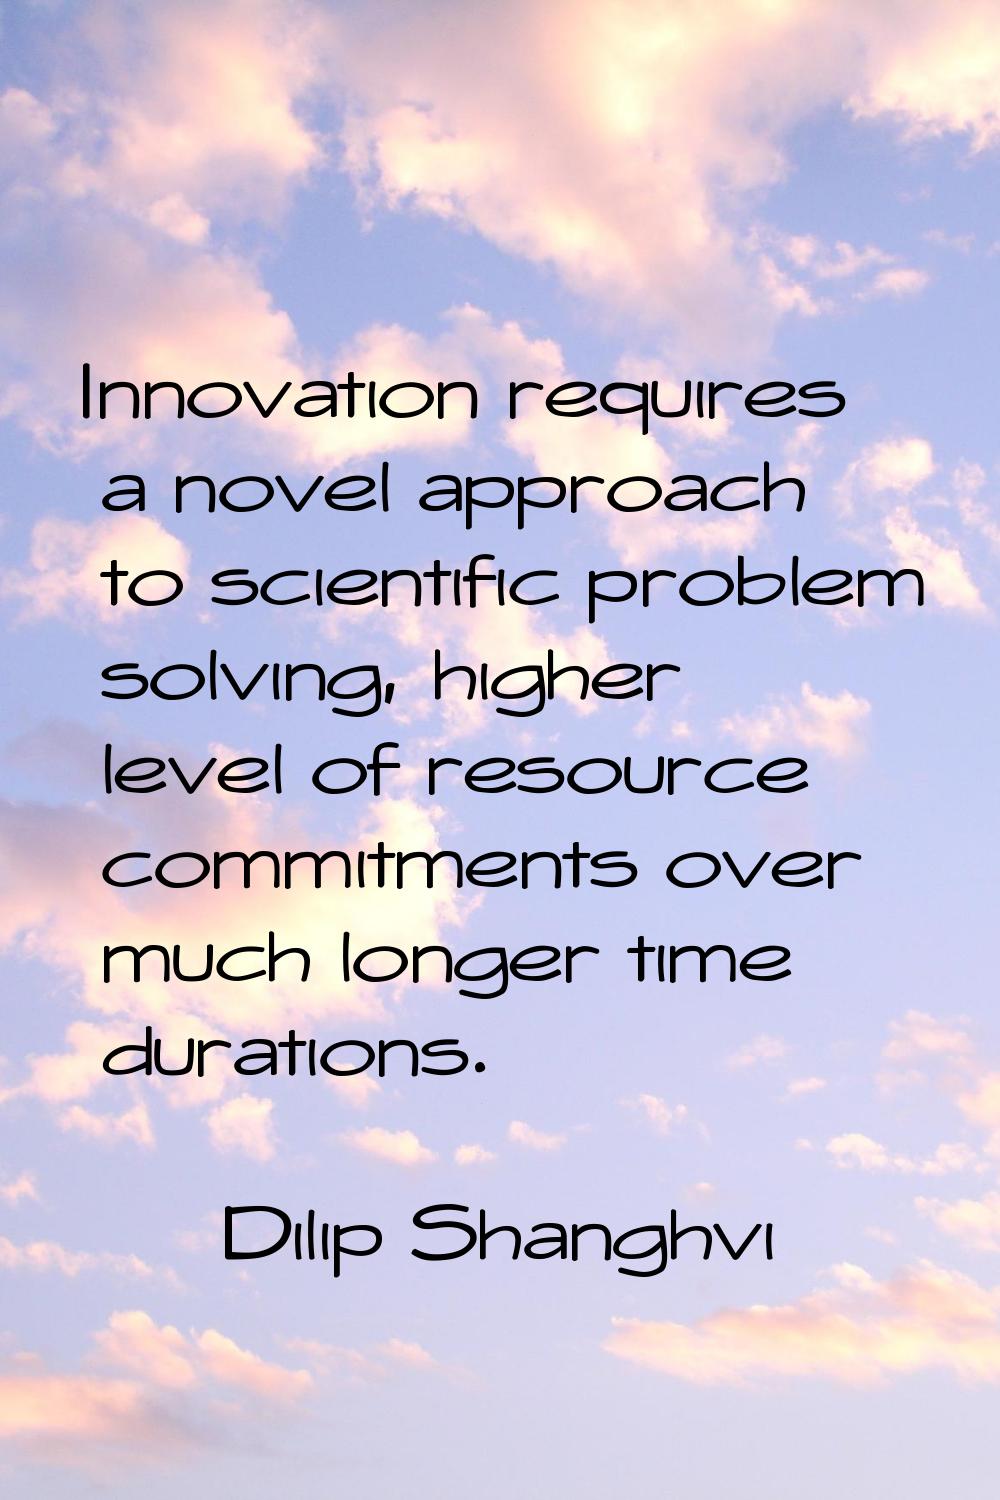 Innovation requires a novel approach to scientific problem solving, higher level of resource commit